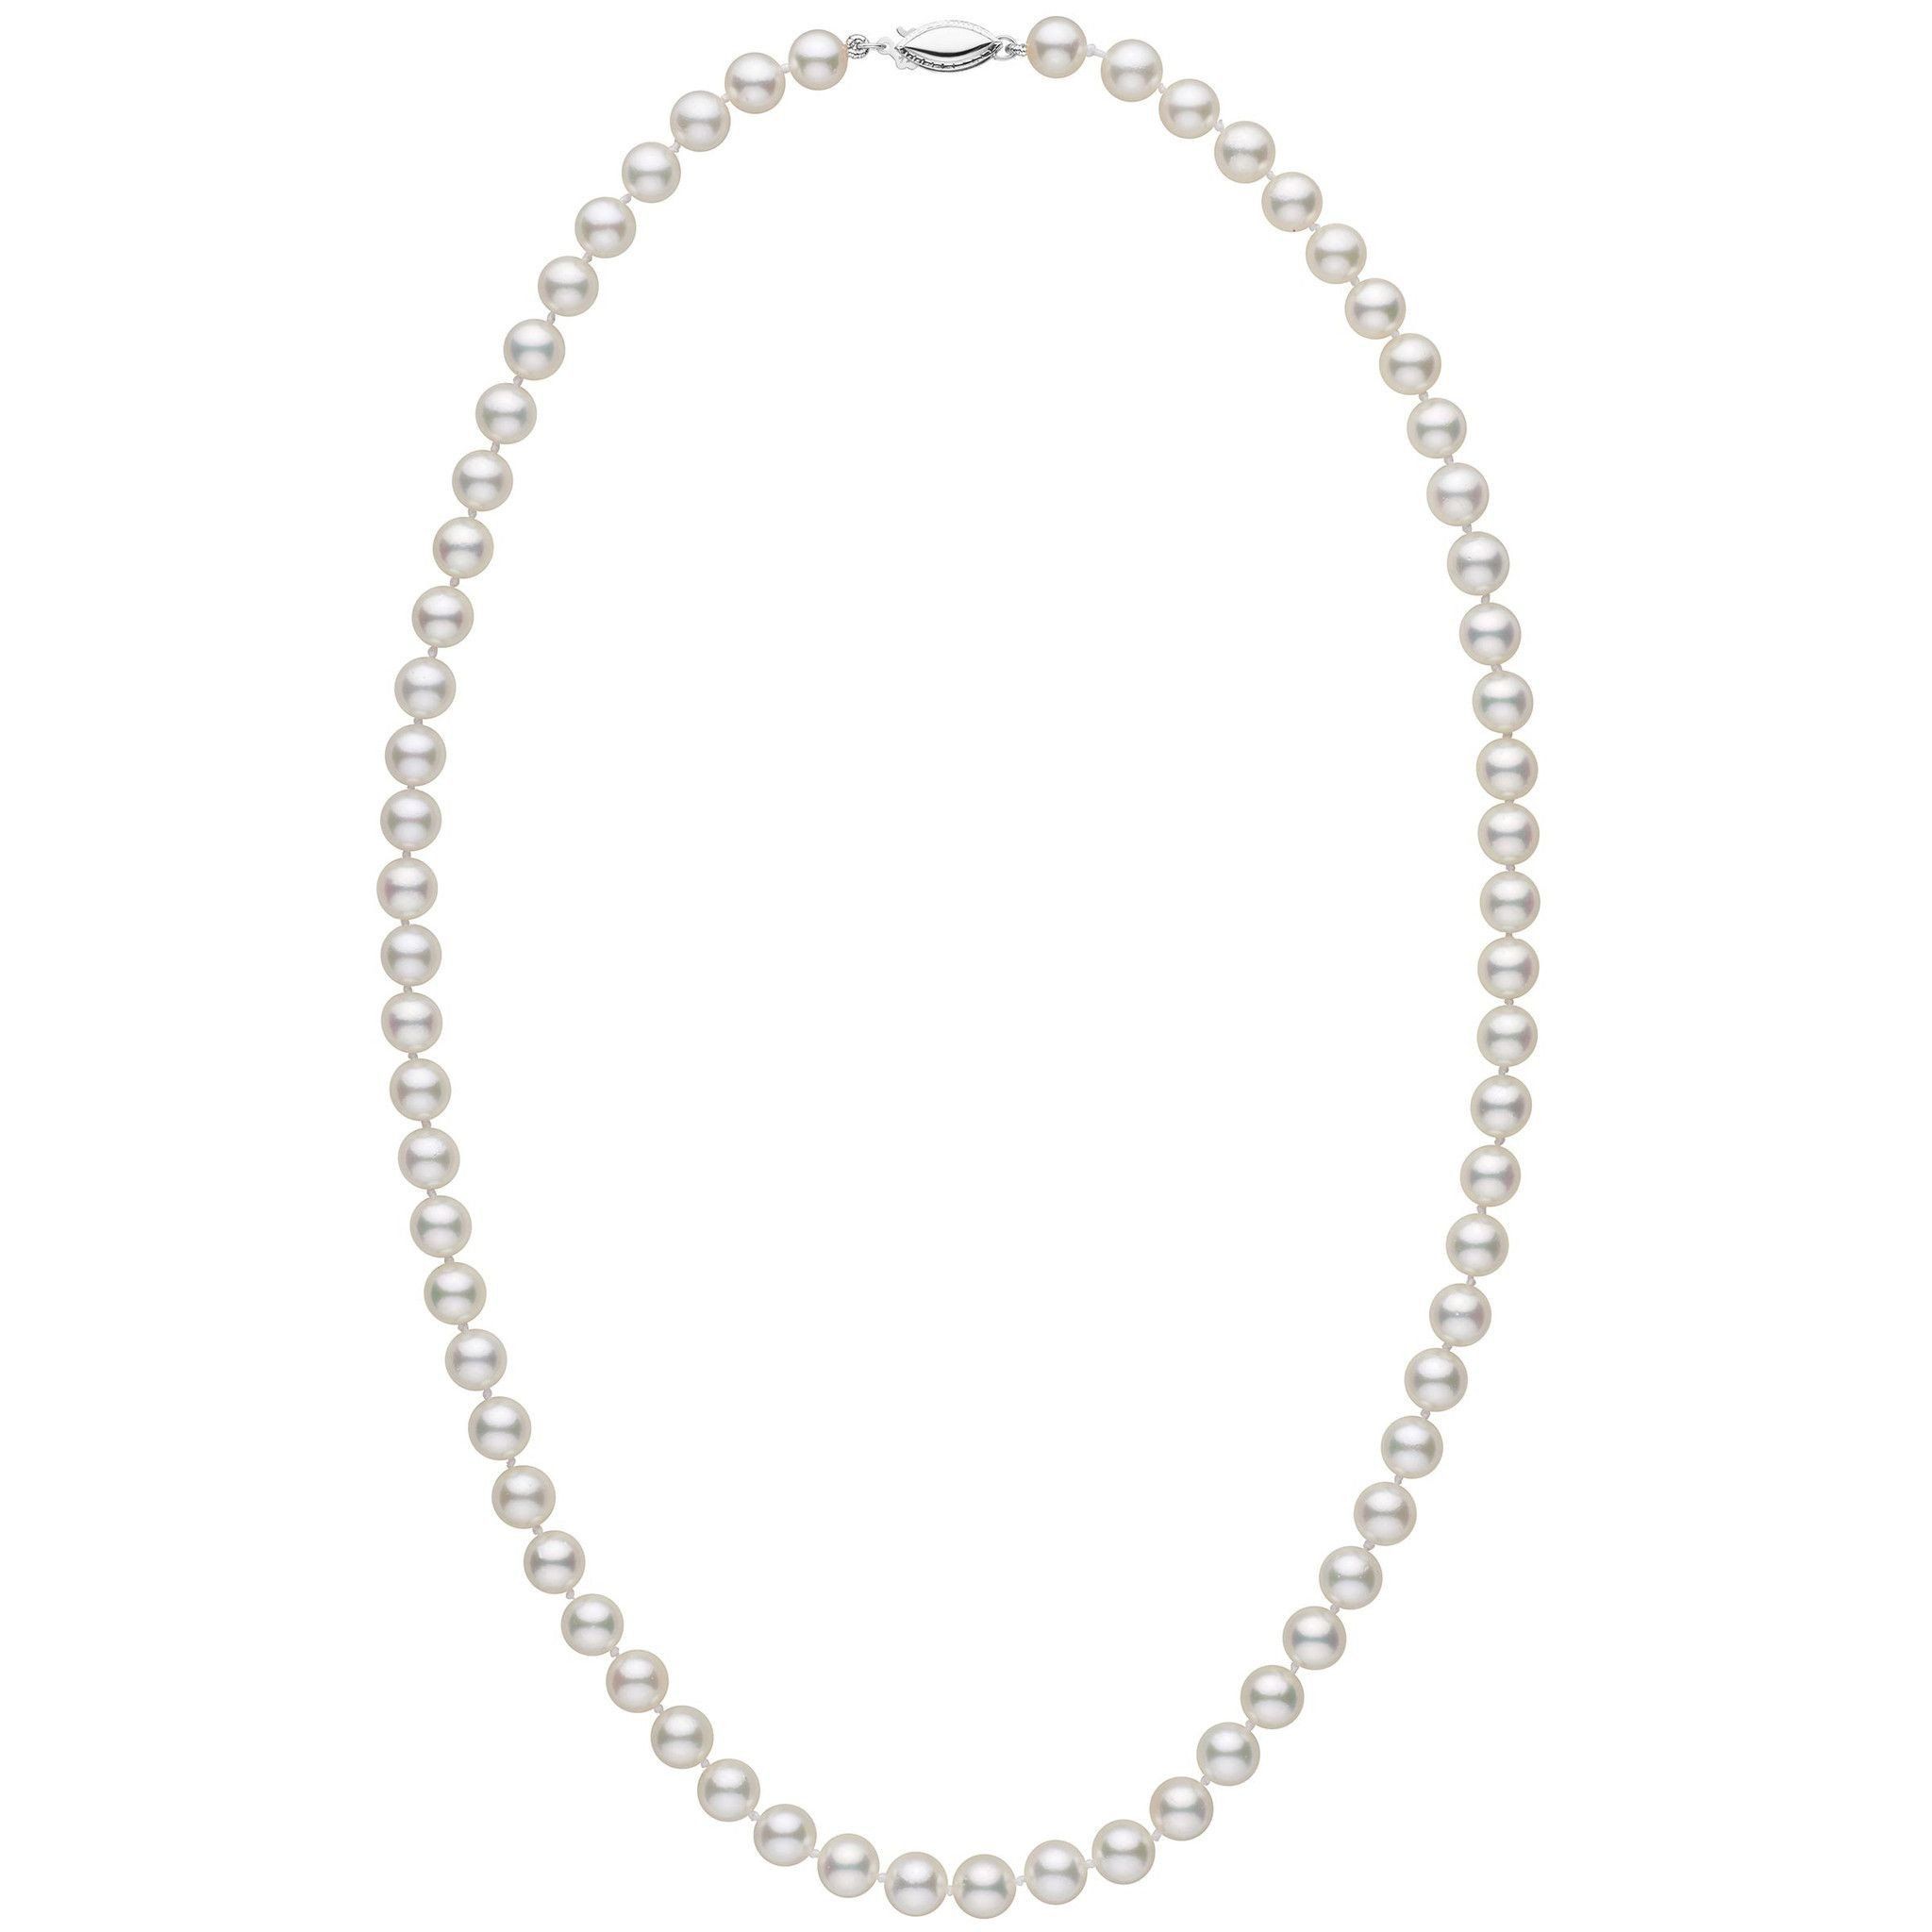 Products 6.5-7.0 mm 22 Inch AA+ White Akoya Pearl Necklace White Gold